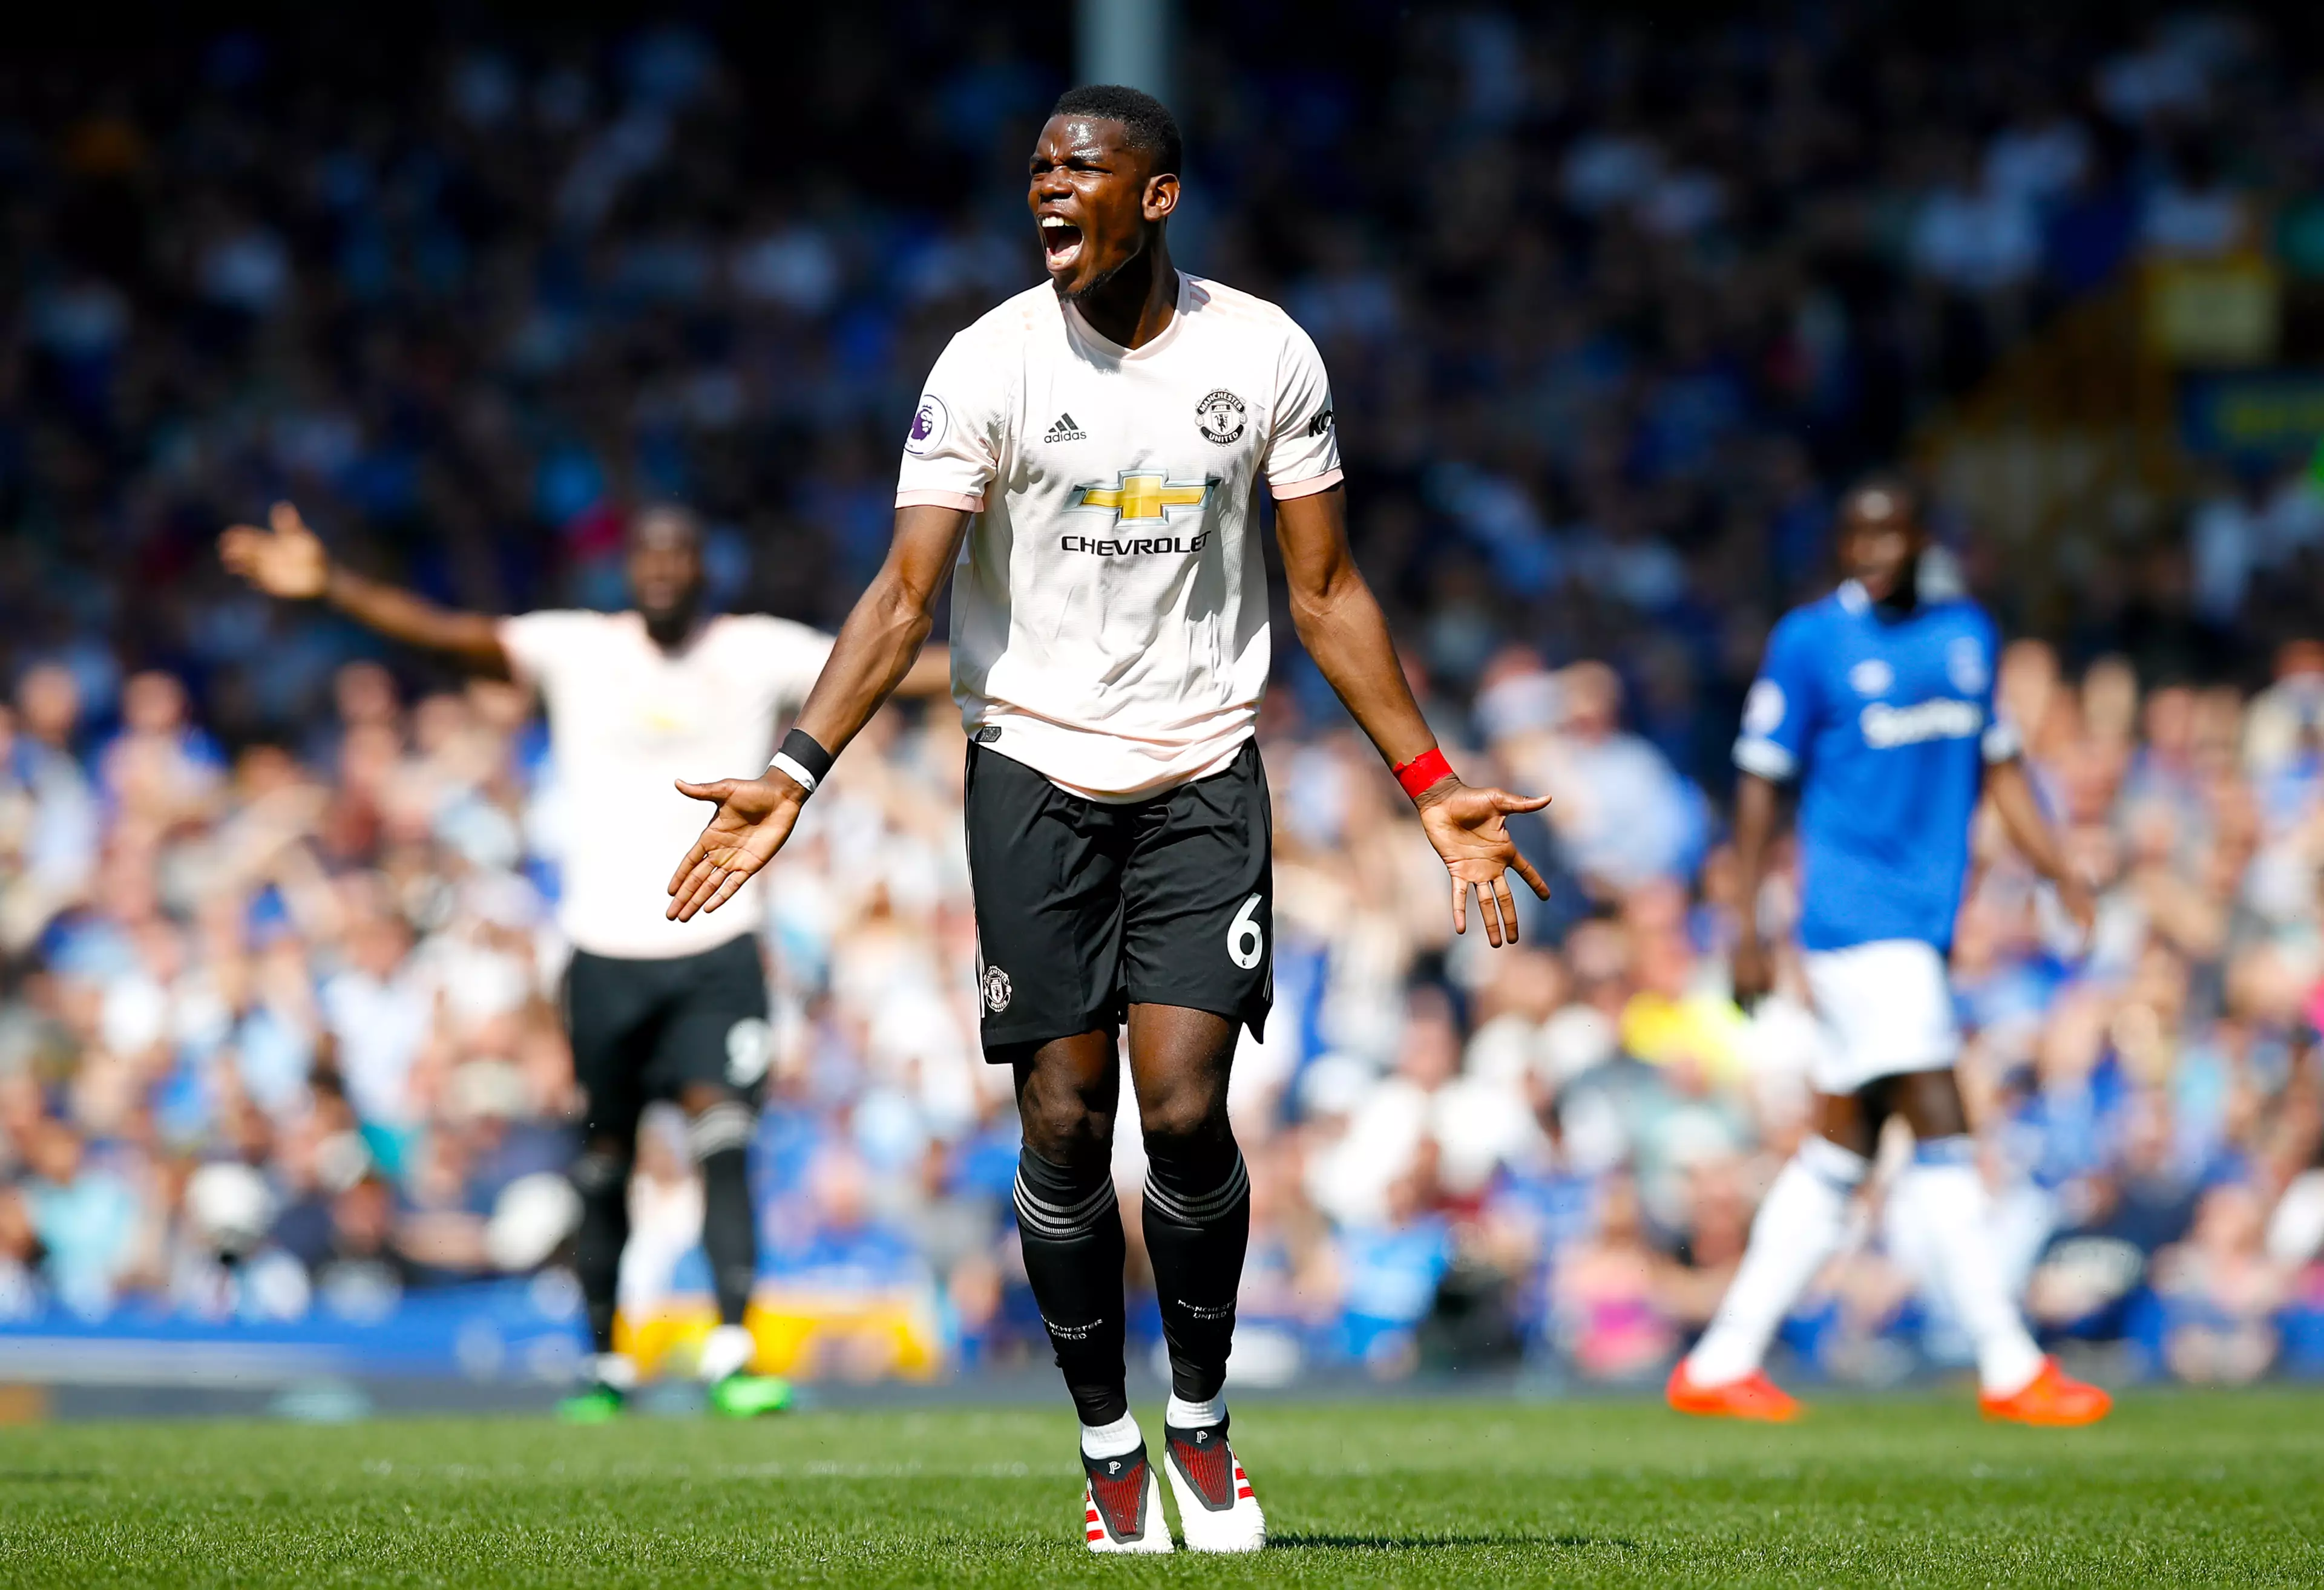 Pogba cuts a frustrated figure at Goodison Park. Image: PA Images